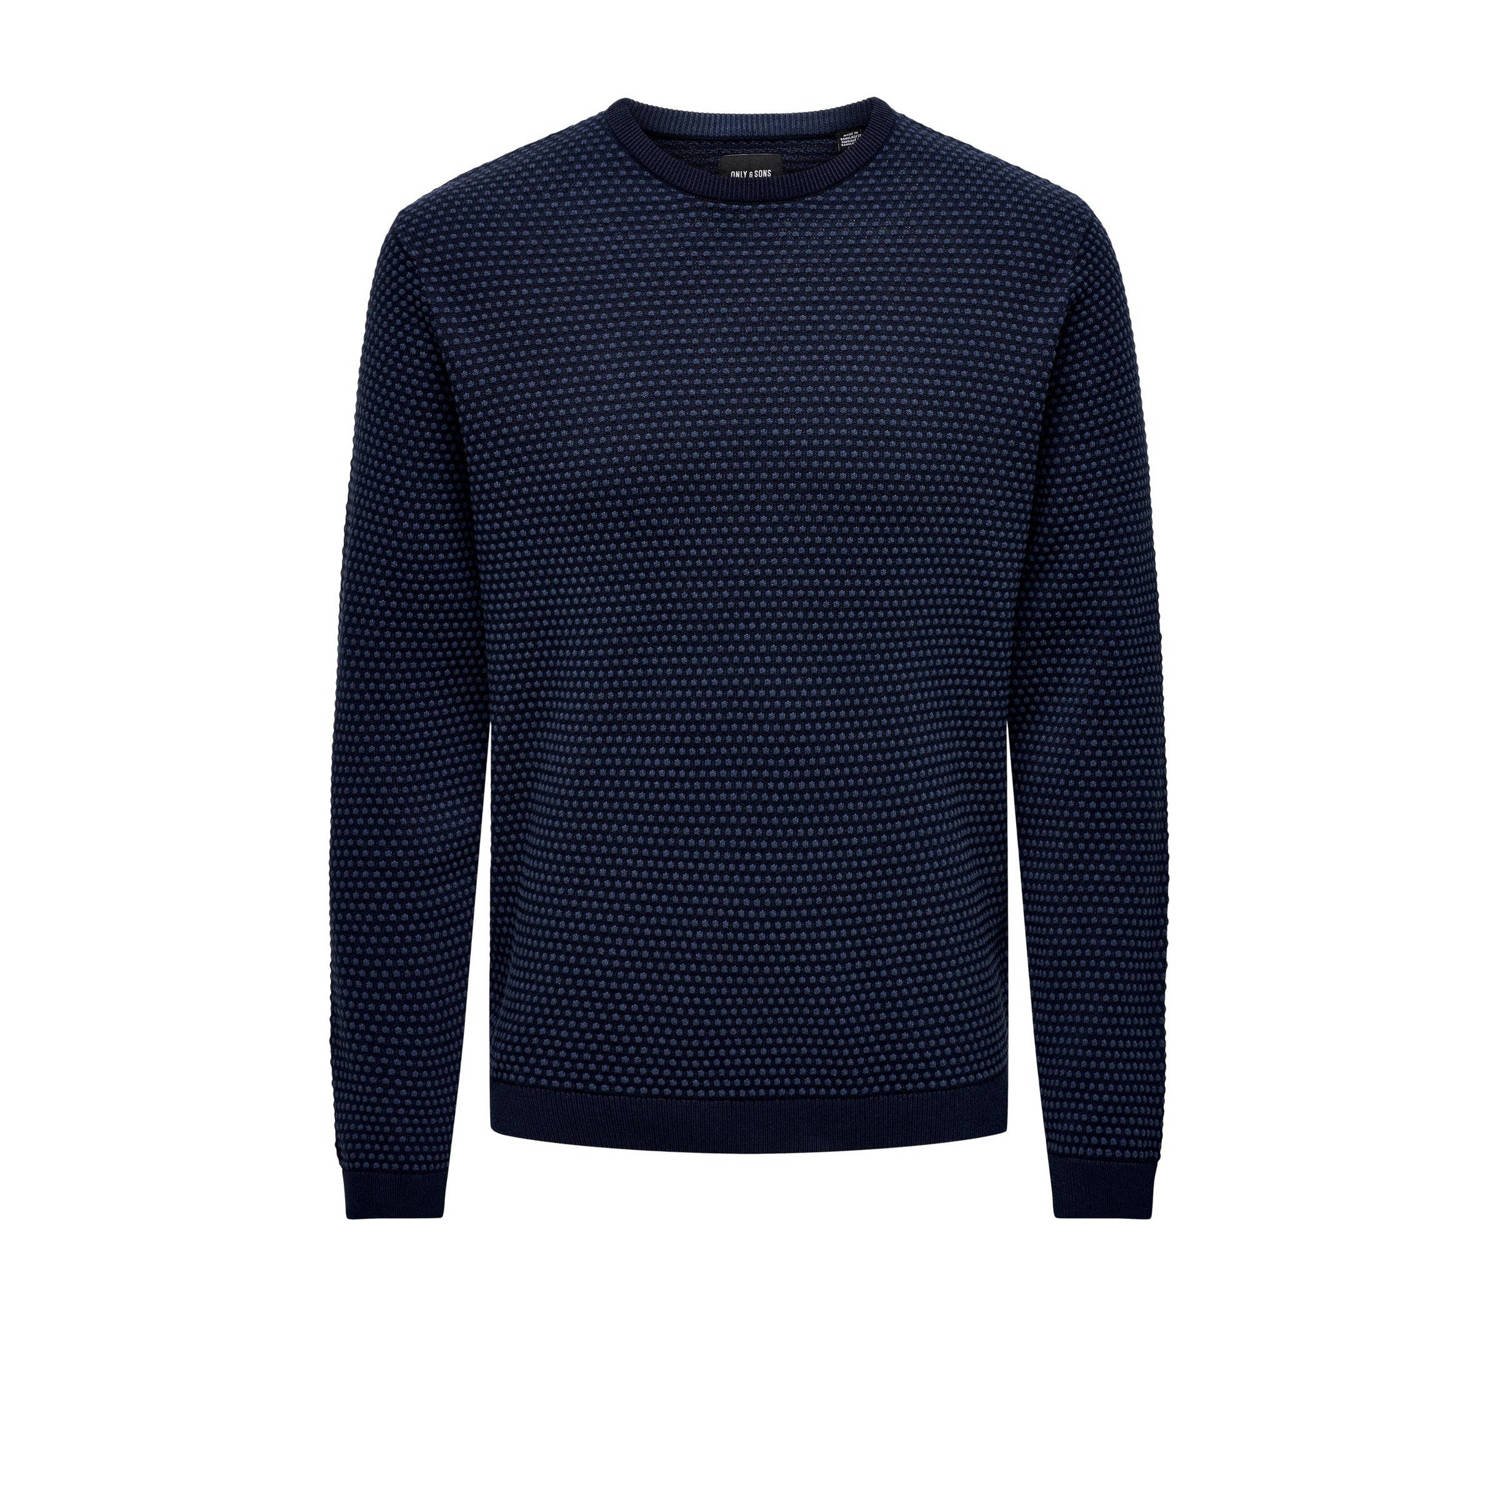 ONLY & SONS trui ONSTAPA donkerblauw